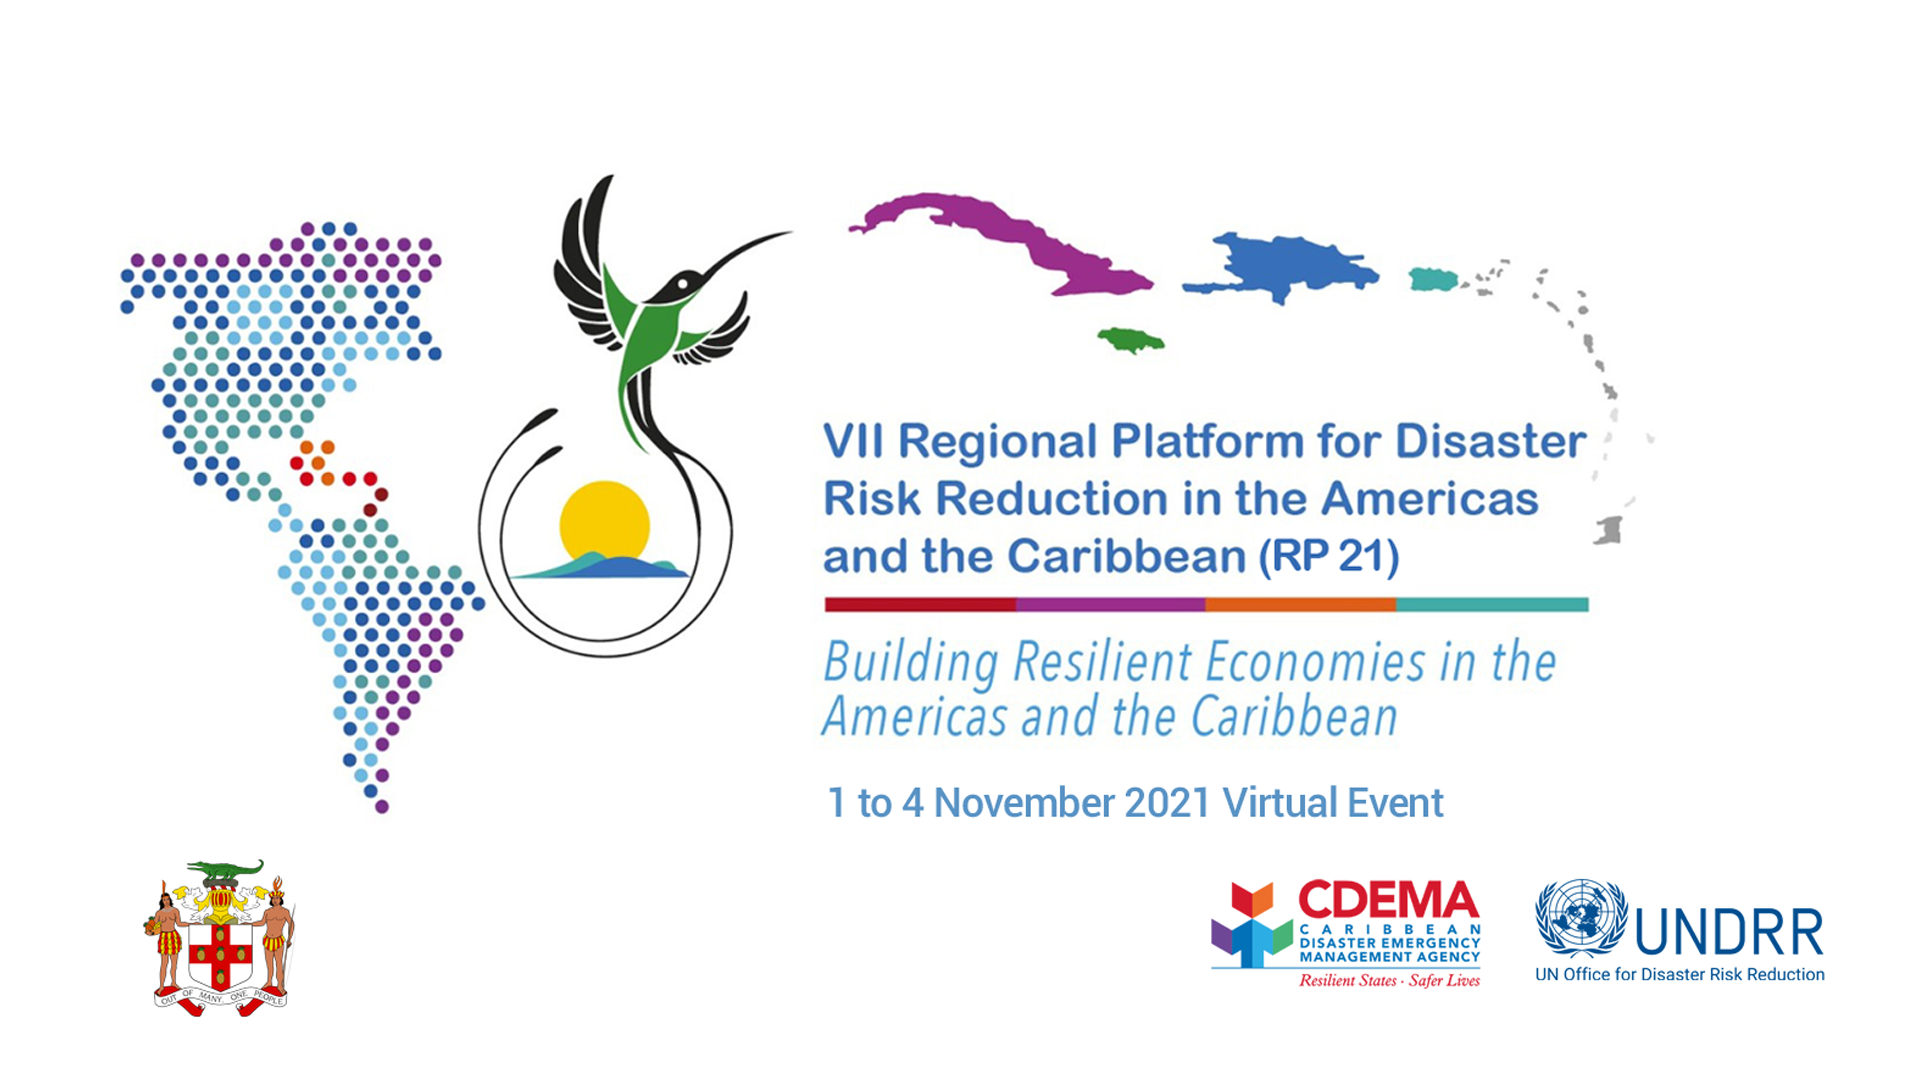 VII Regional Platform for Disaster Risk Reduction in the Americas and the Caribbean is postponed